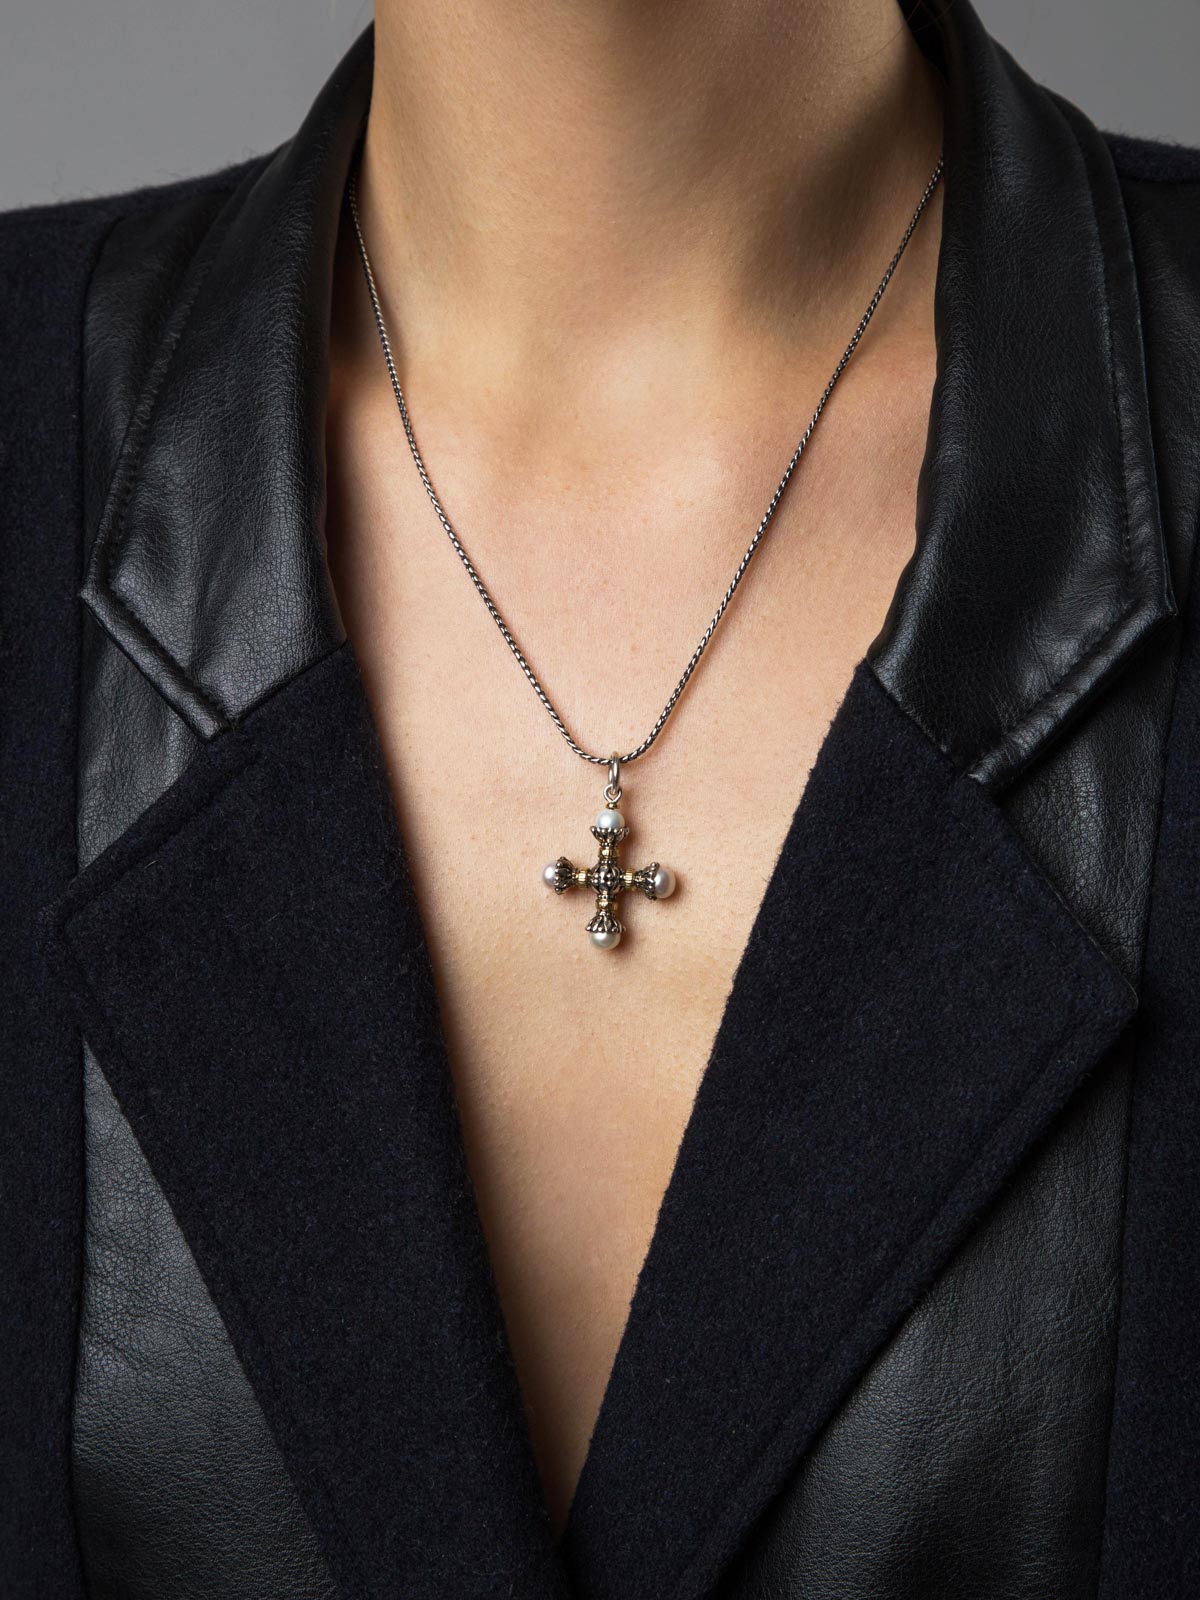 PENDANT CROSS WITH PEARLS